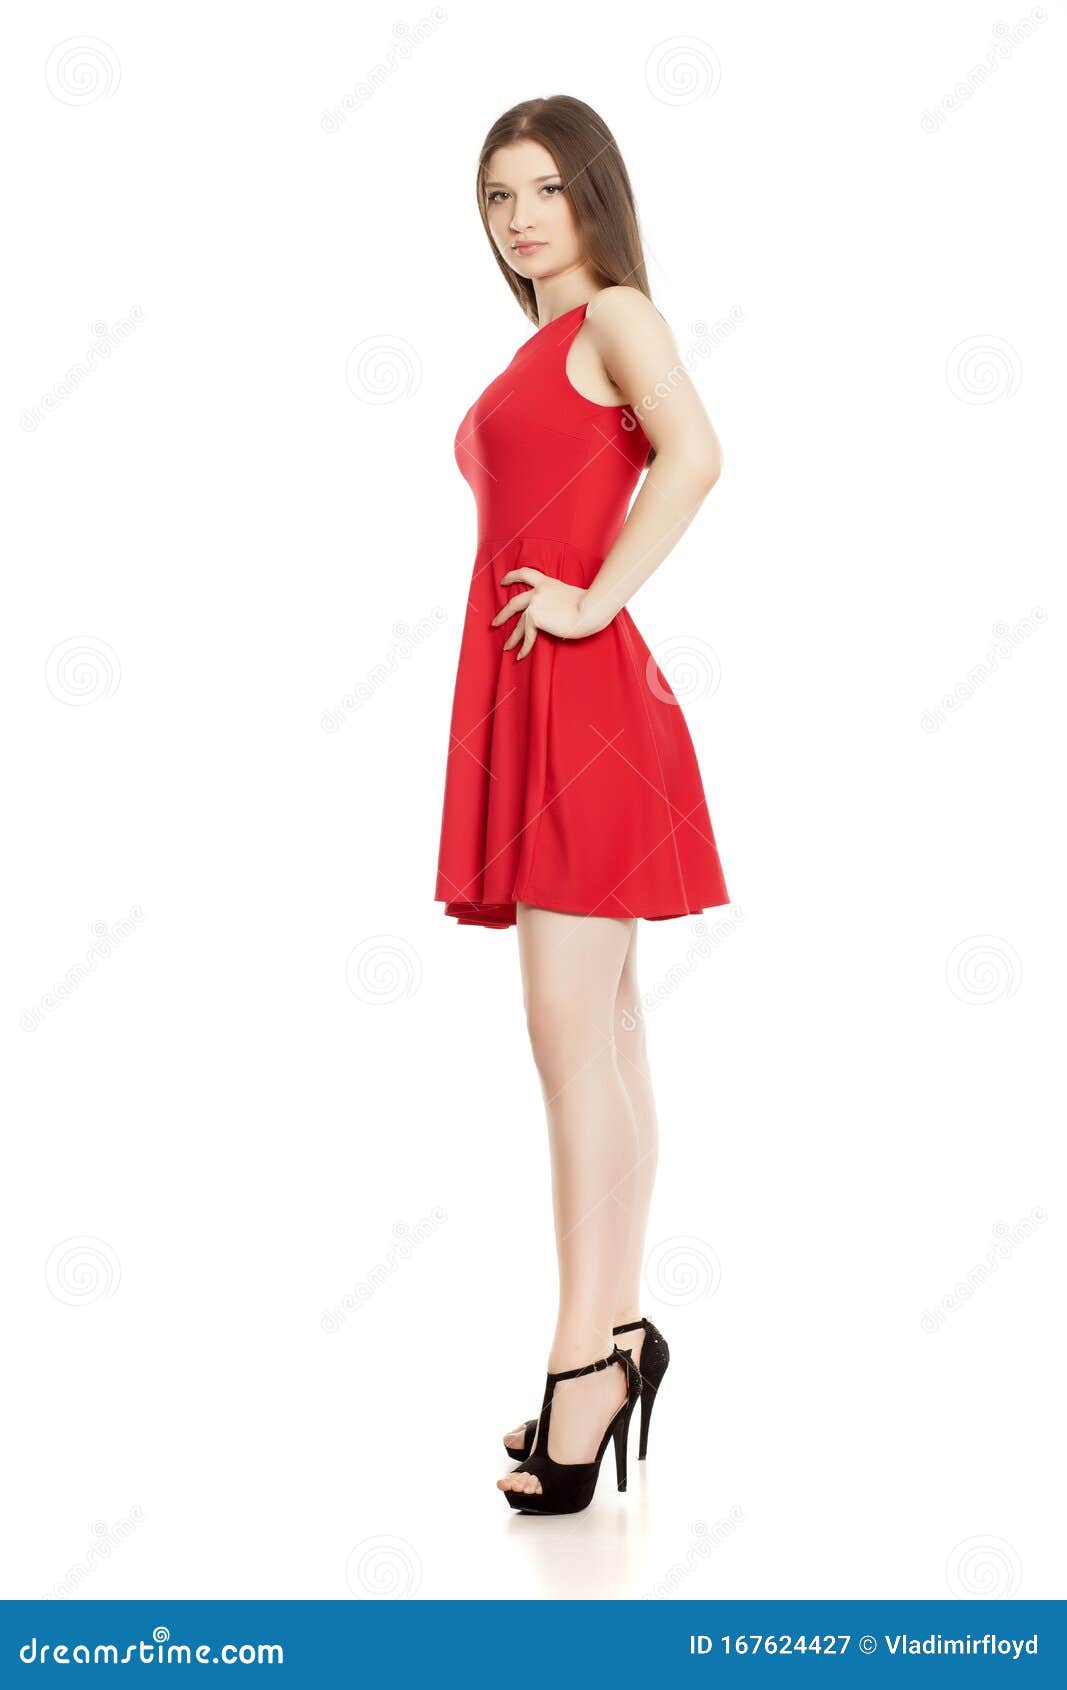 red dress and red heels